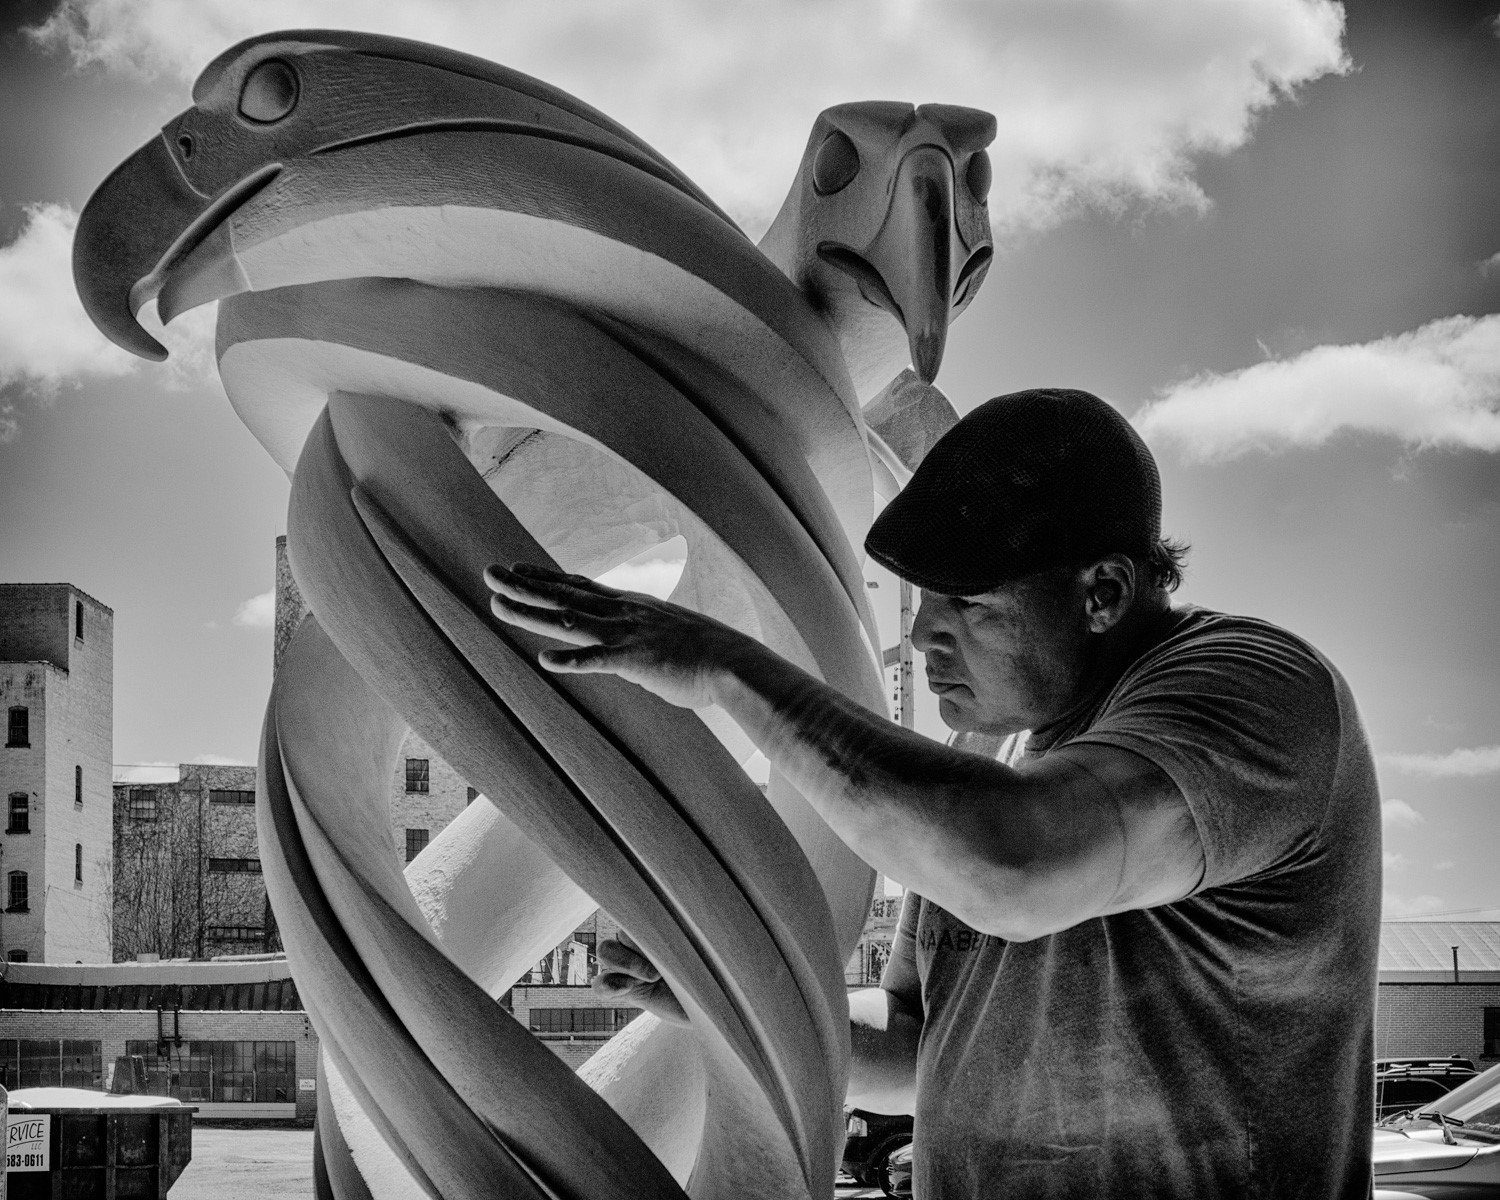 Artist Jason Quigno at work on a stone sculpture. Photo by Eric Bouwens